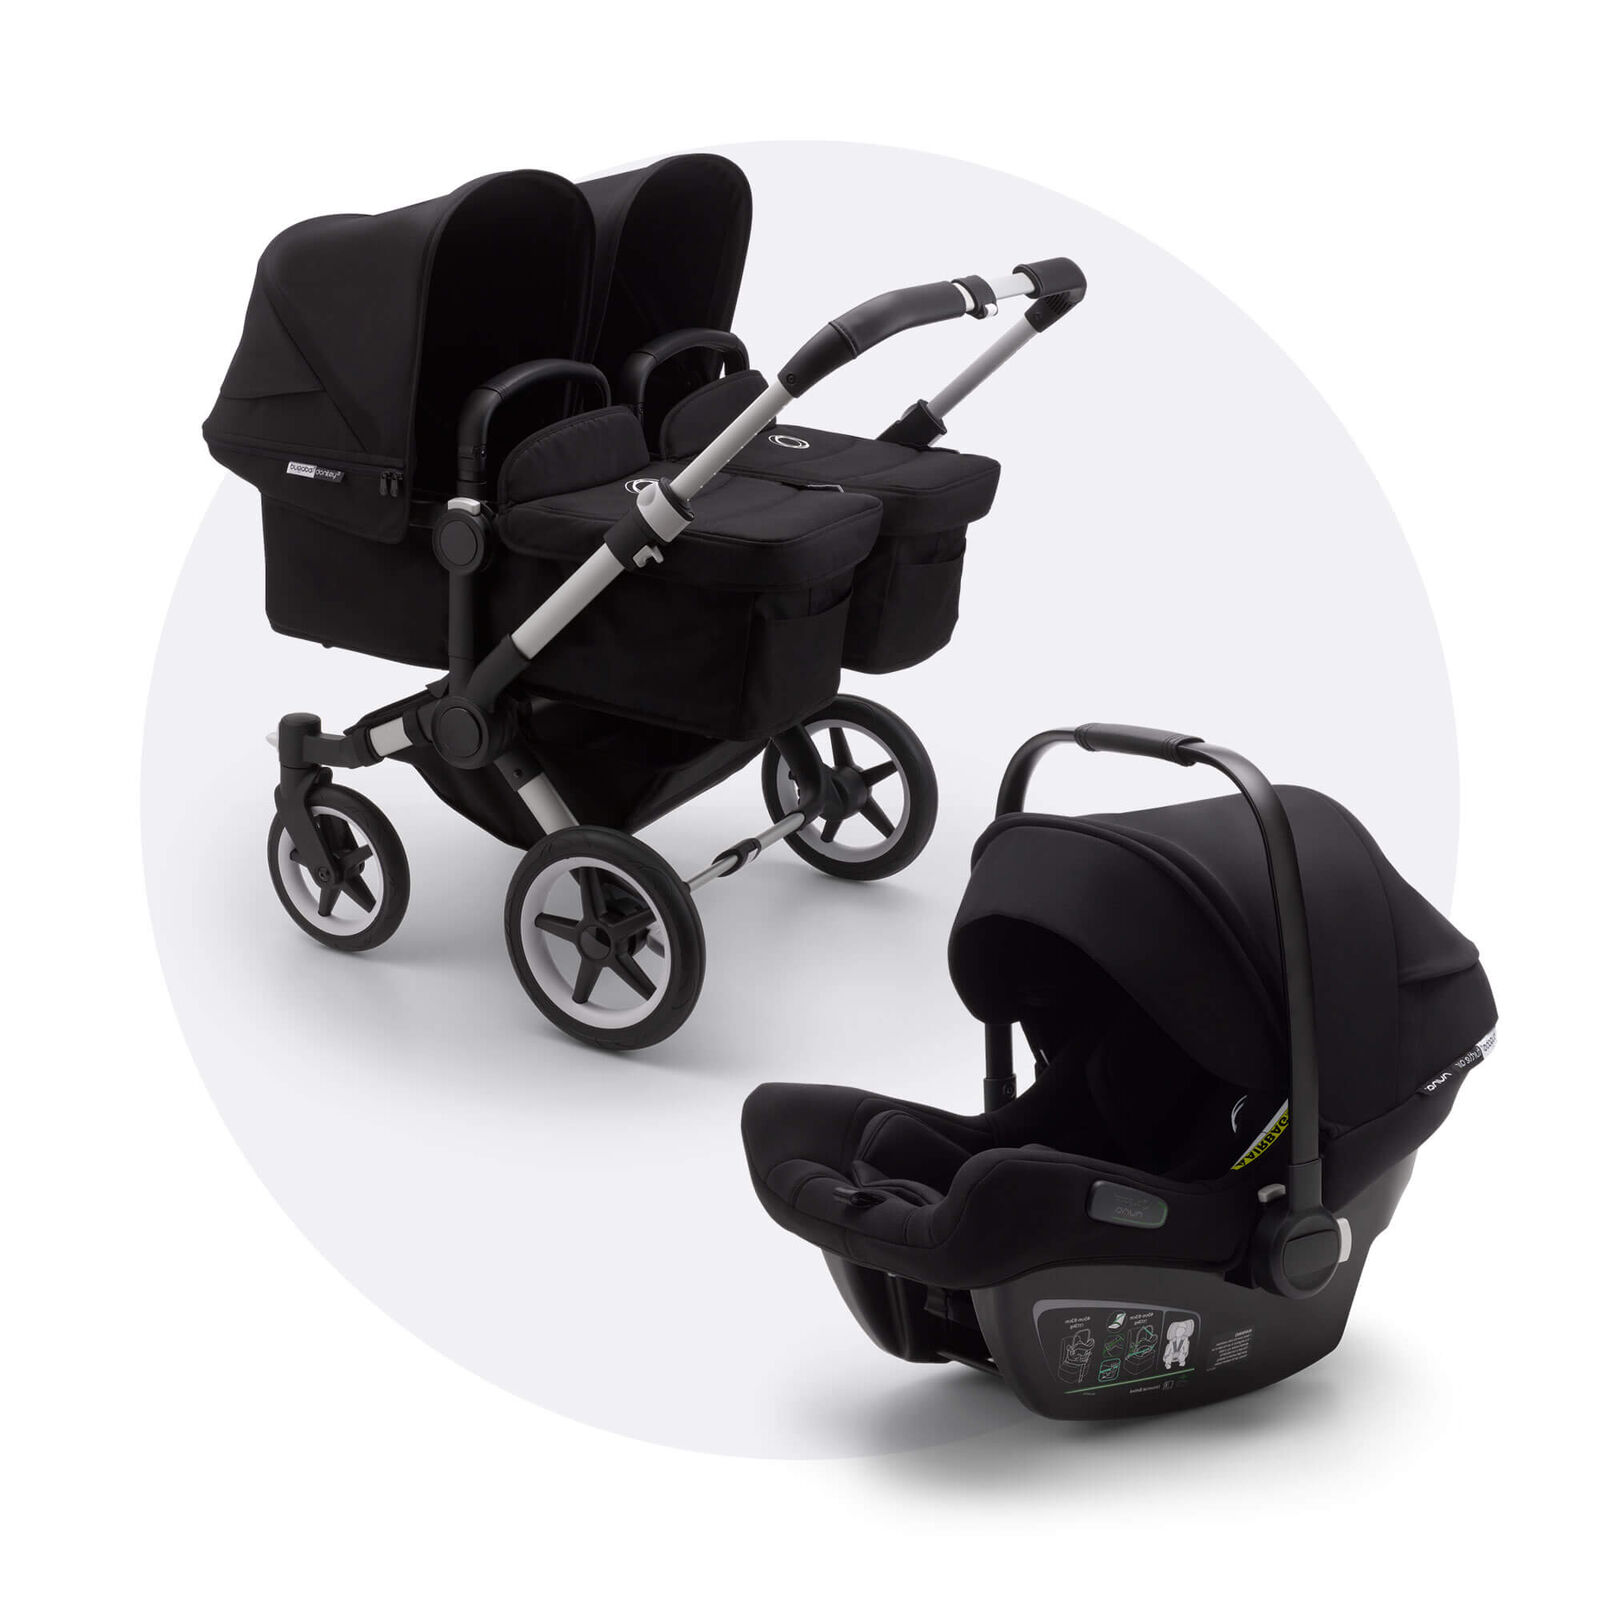 Bugaboo Donkey 3 Twin travel system - View 1